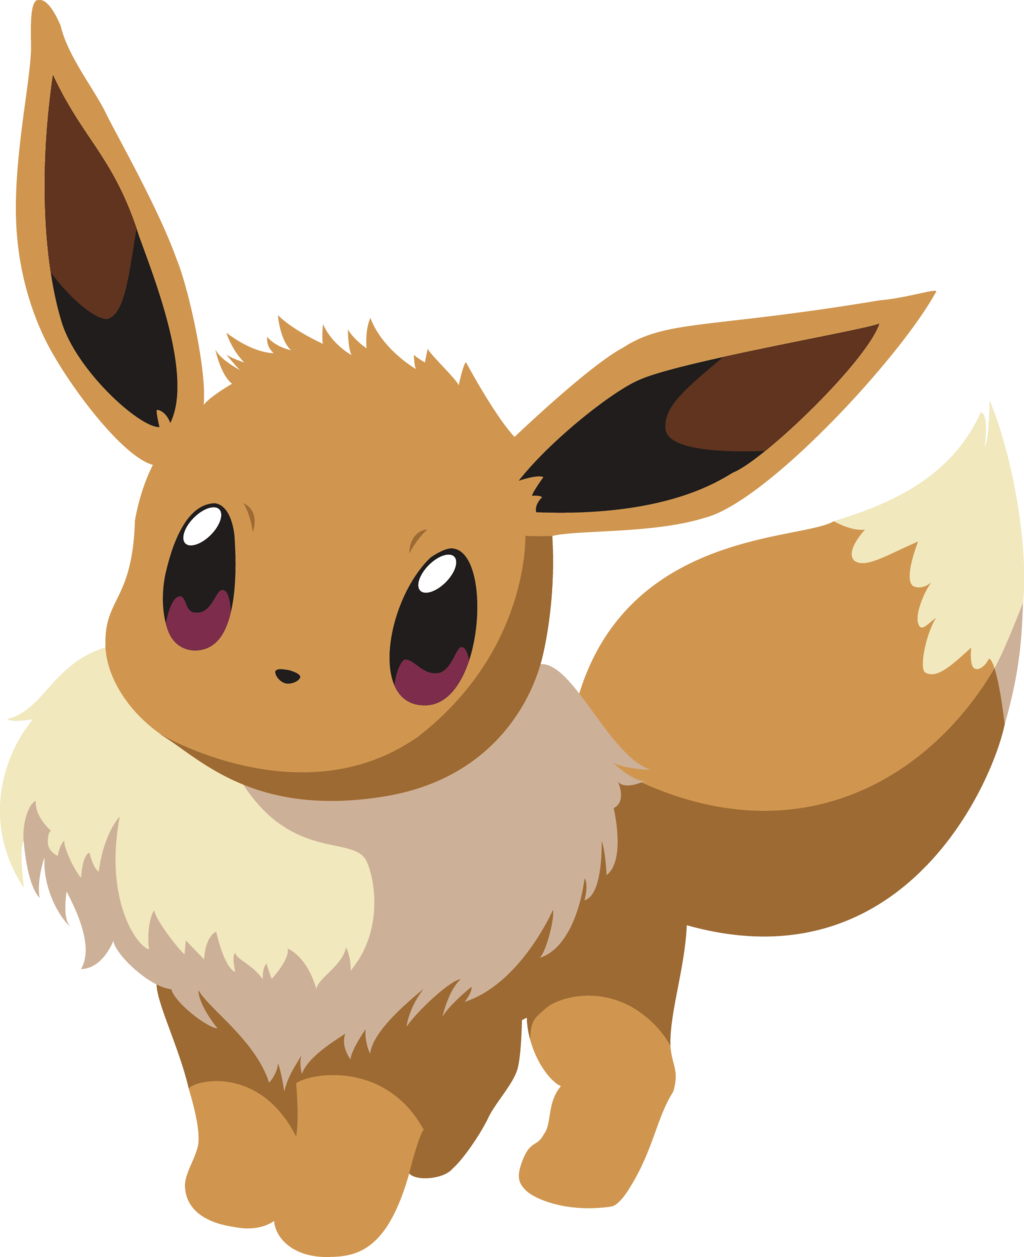 Pokemon Go PNG Transparent Images | PNG All